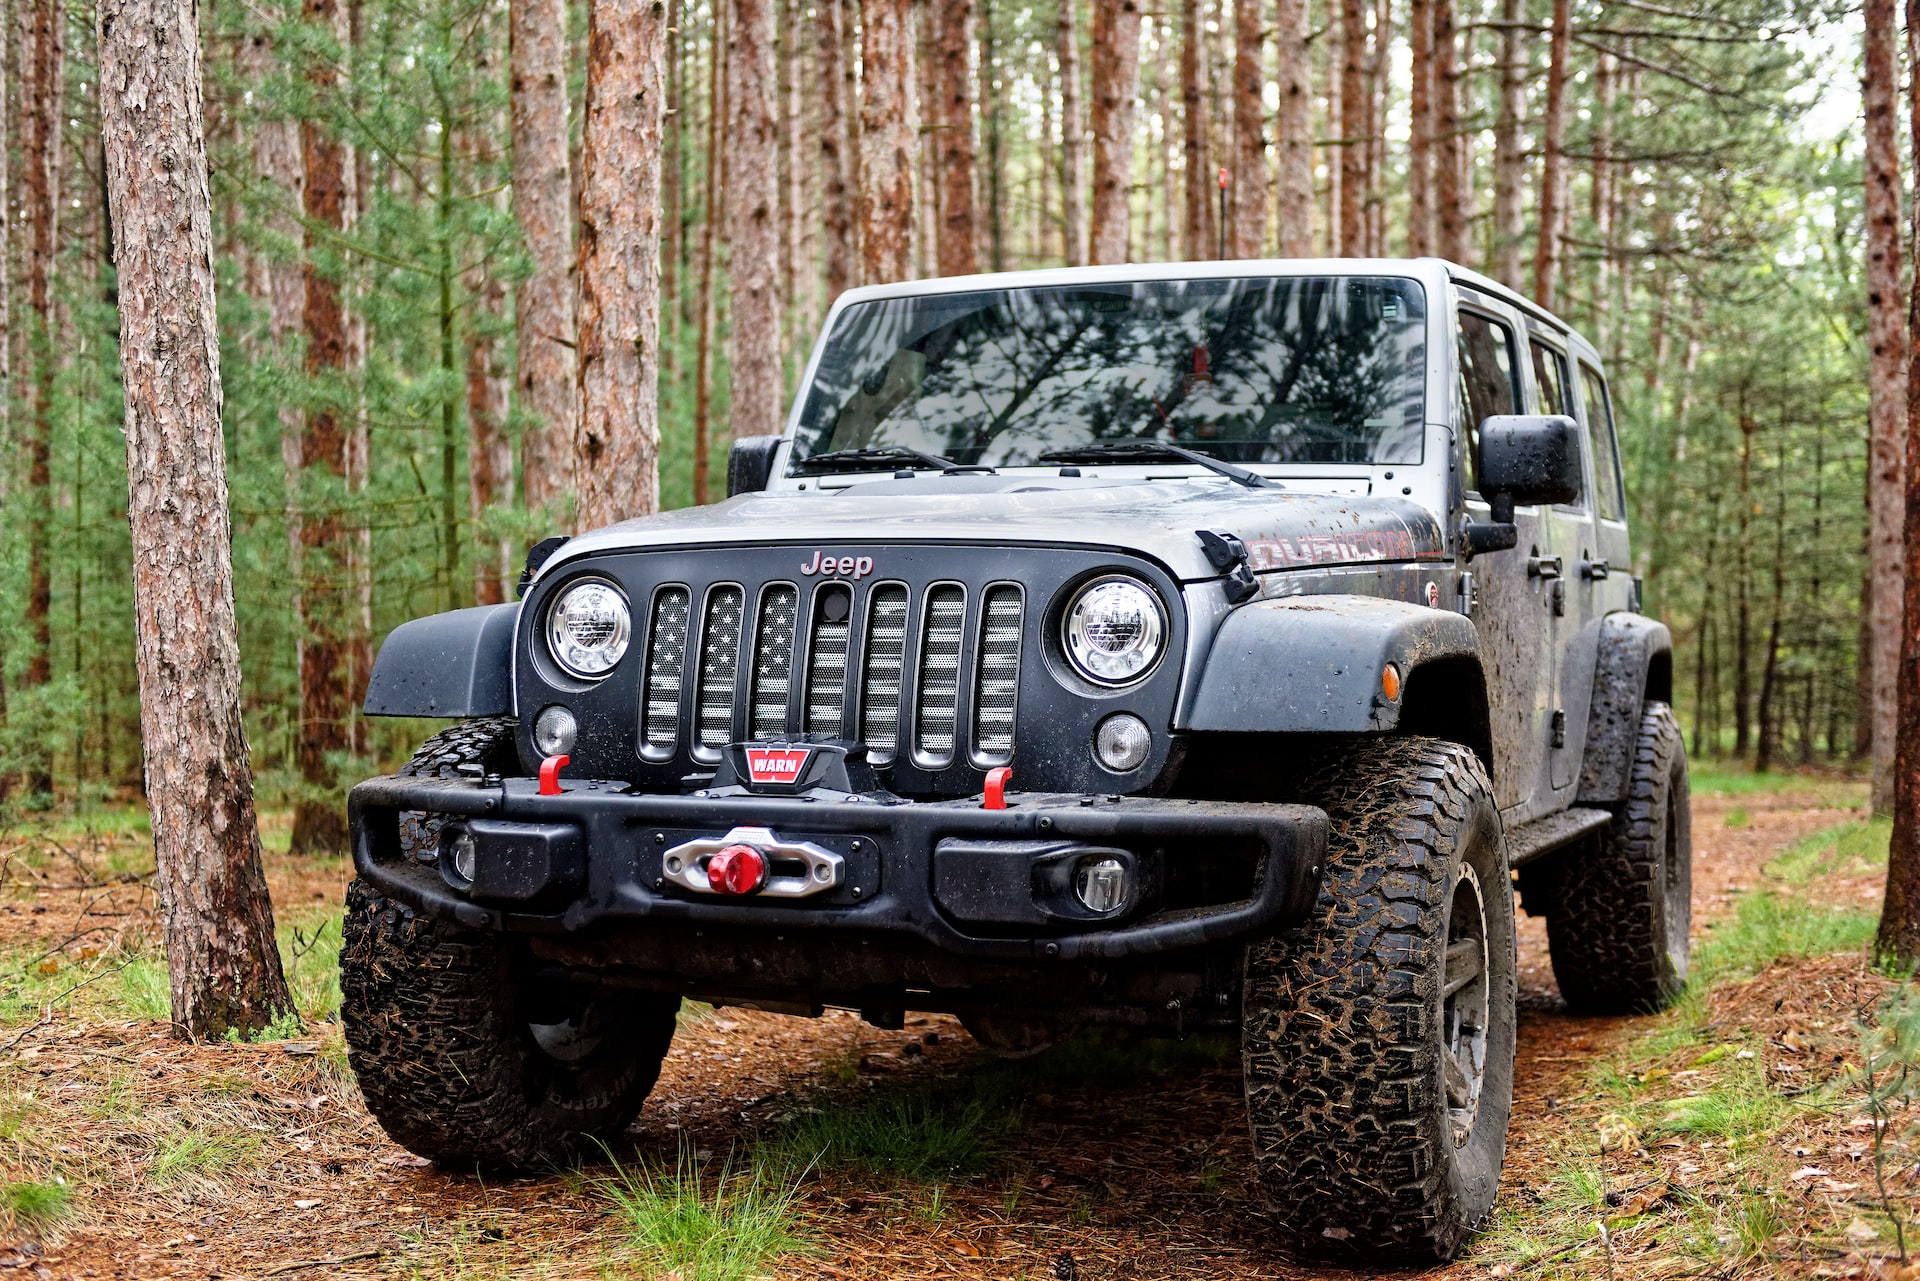 Jeep in the woods.